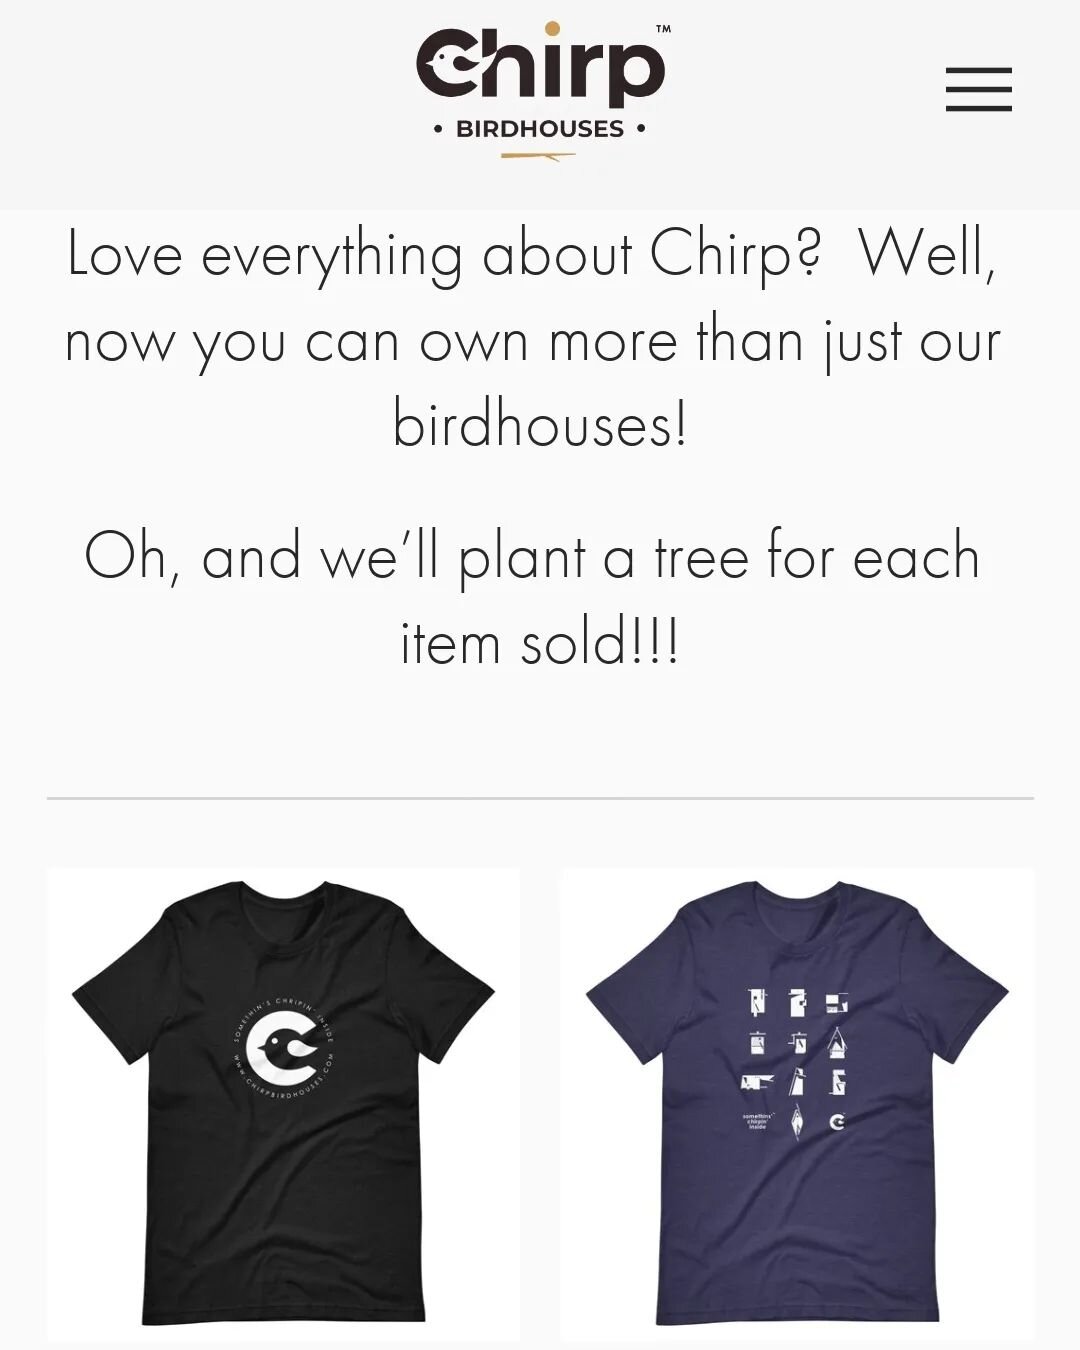 Love what Chirp is all about? Now you can show your love on the clothes you wear! Checkout our merch on our website! 
.
.
.
.
.
#chirp #chirpbirdhouses #birdhouses #modernbirdhouses #birdhouselove #birdhousekits #merch #giftideas #gifts